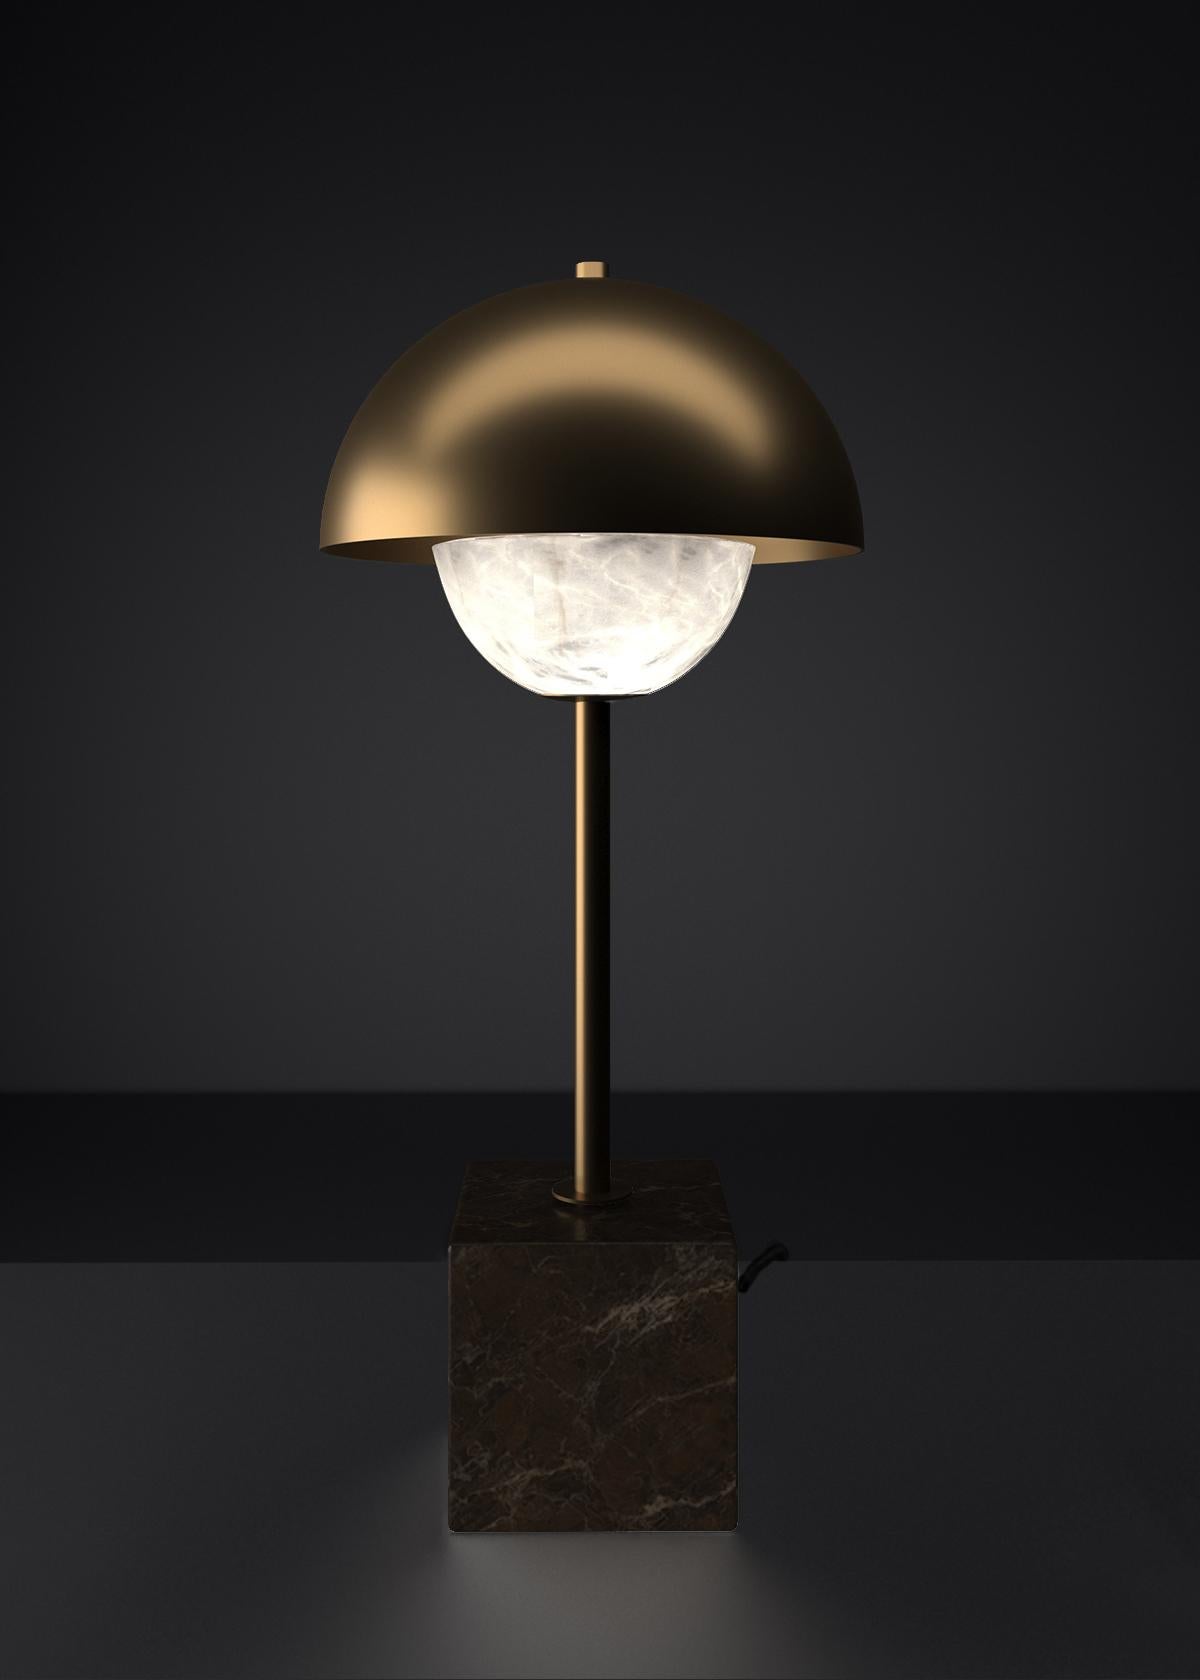 Apollo Bronze Table Lamp by Alabastro Italiano
Dimensions: D 30 x W 30 x H 74 cm.
Materials: White alabaster, Nero Marquinia marble, black silk cables and bronze.

Available in different finishes: Shiny Silver, Bronze, Brushed Brass, Ruggine of